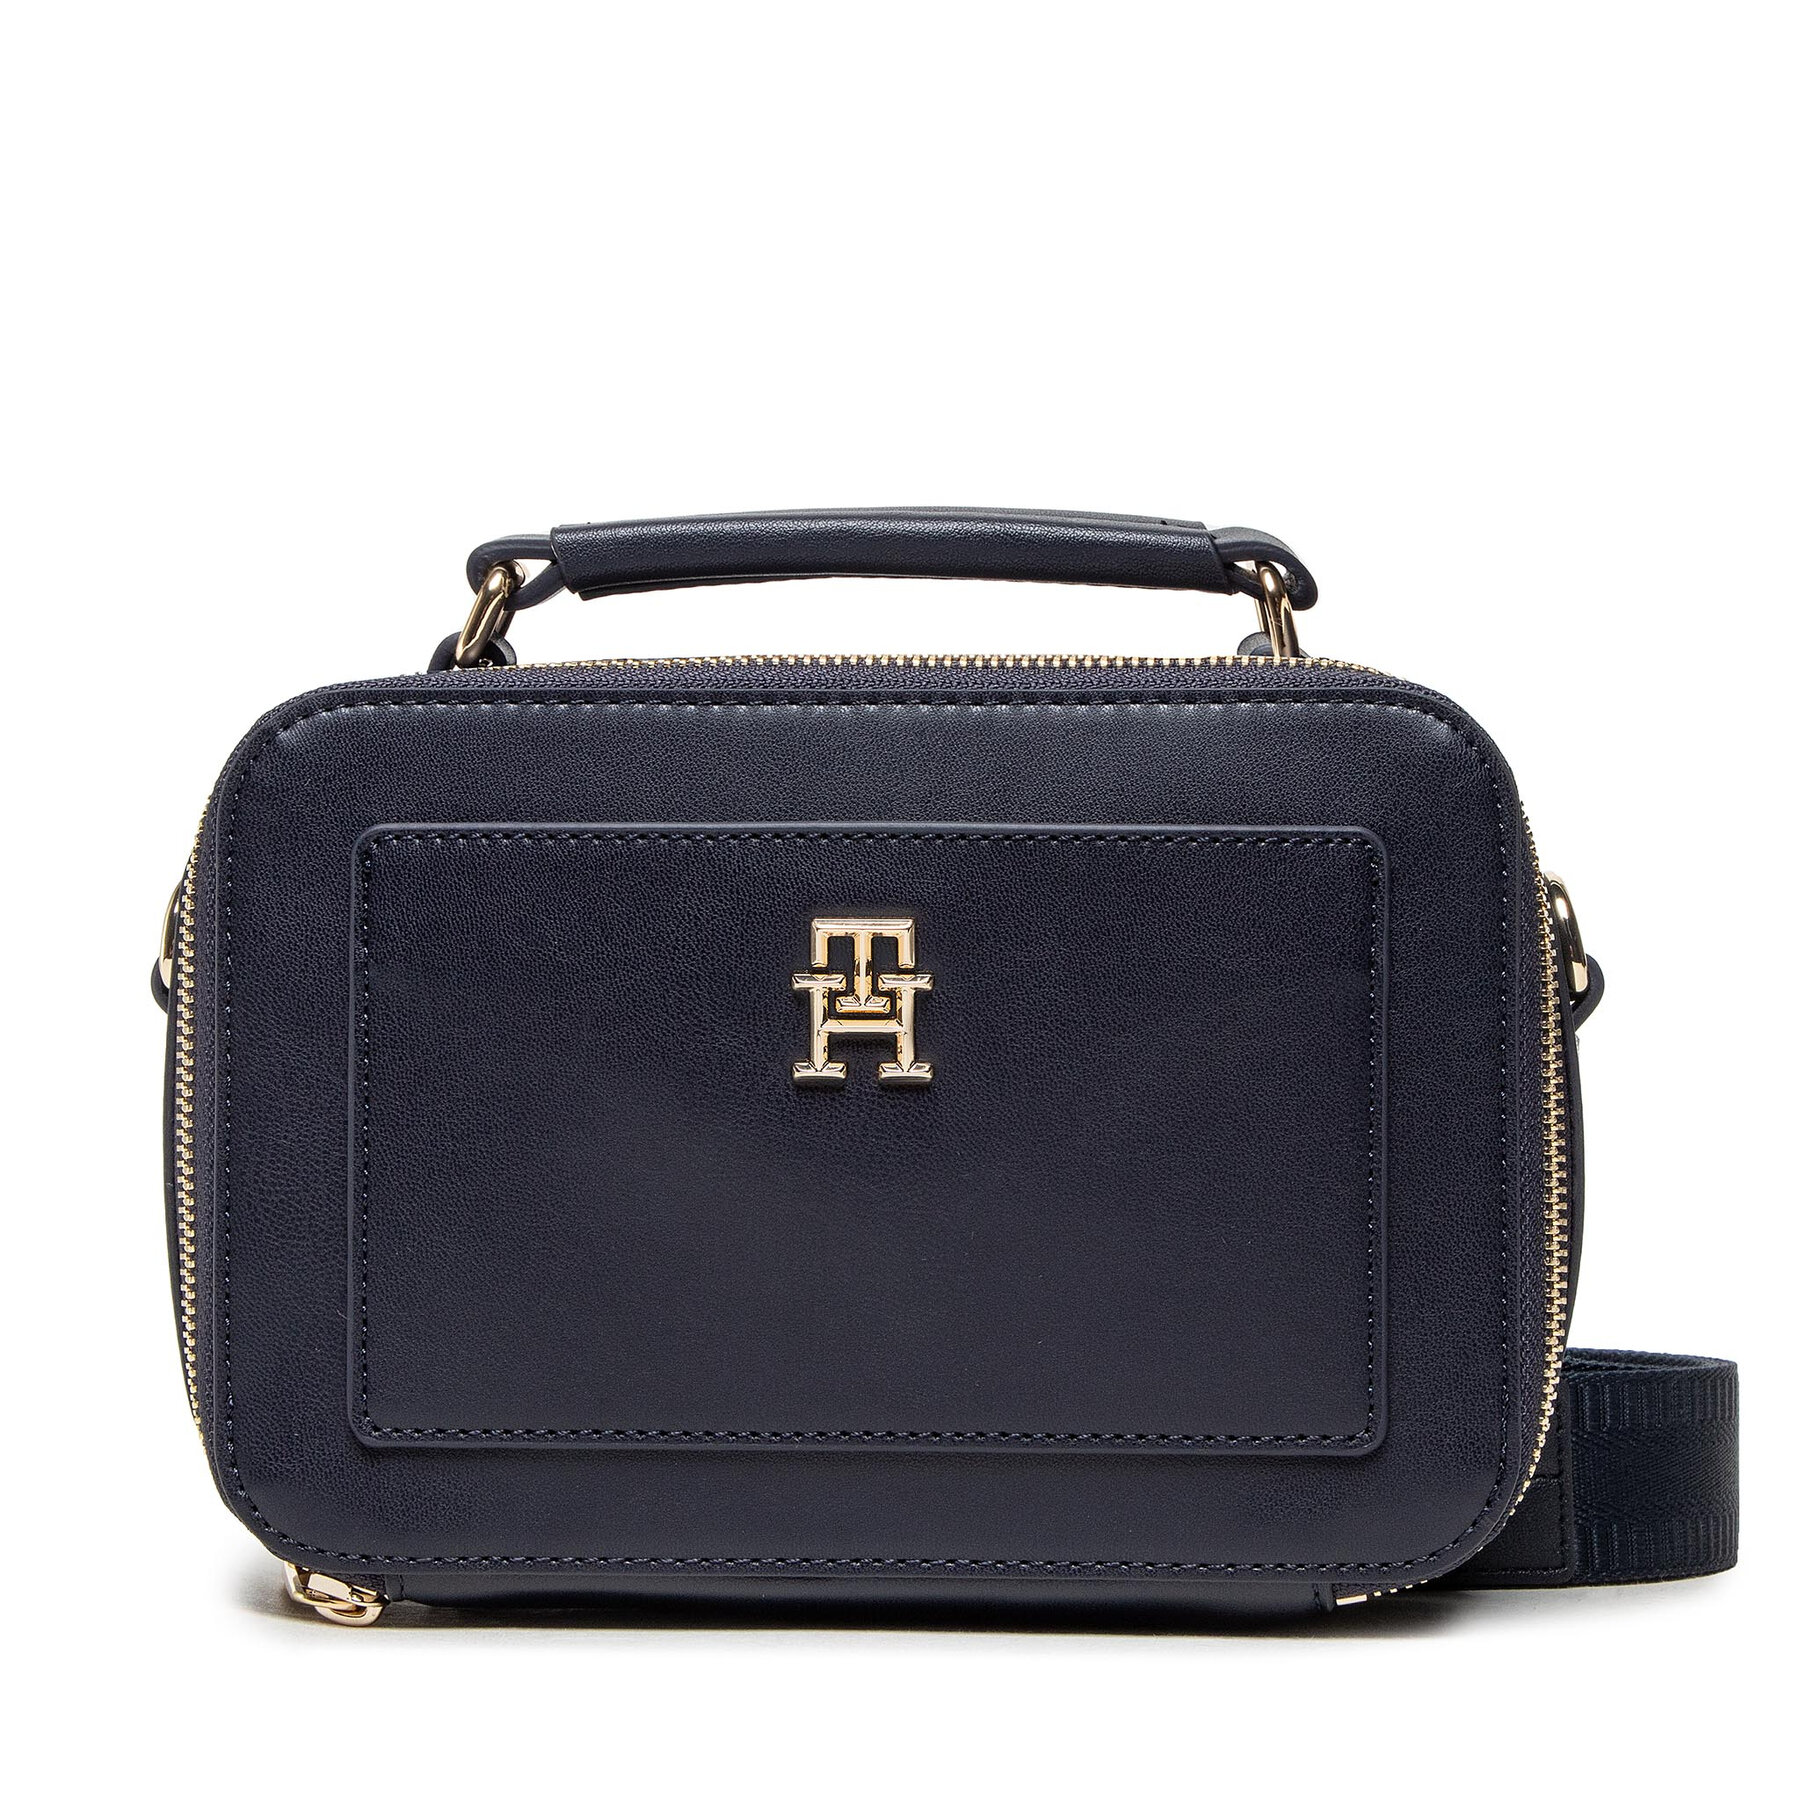 Geantă Tommy Hilfiger Iconic Tommy Trunk AW0AW13141 DW6 AW0AW13141 imagine super redus 2022